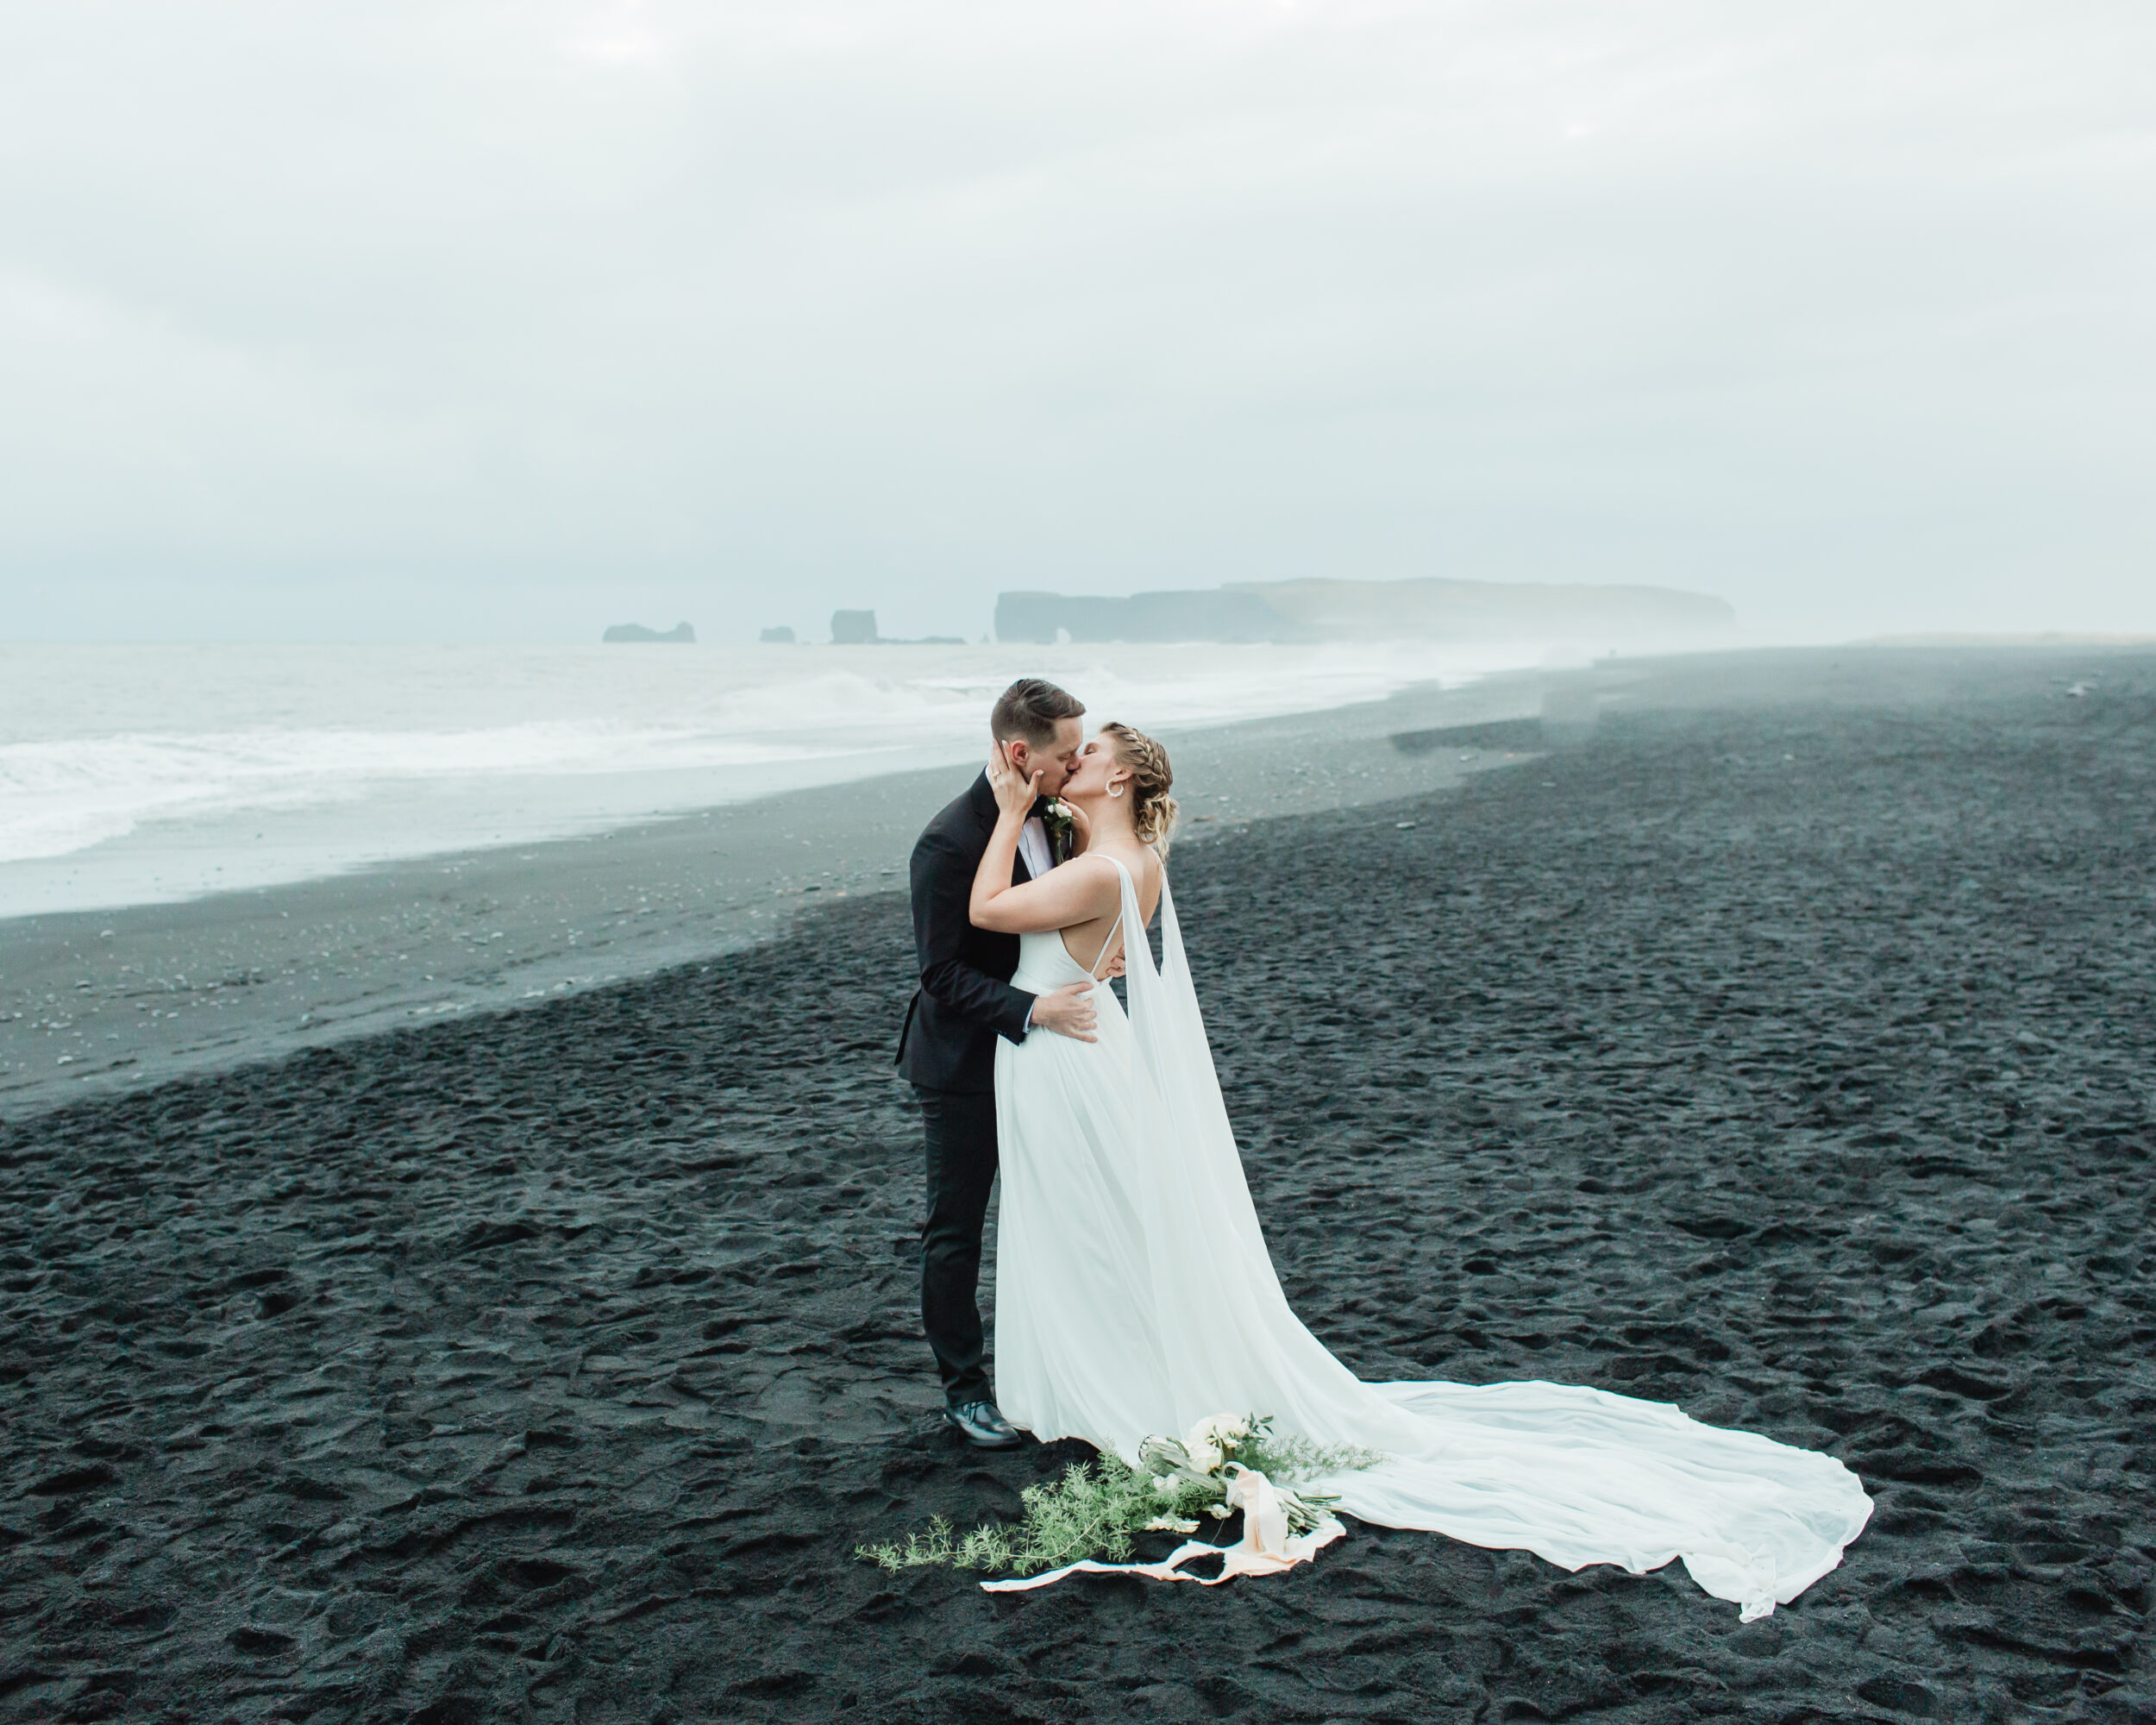 A couple stands next to wedding florals and a sandy beach shore for elopement portraits.